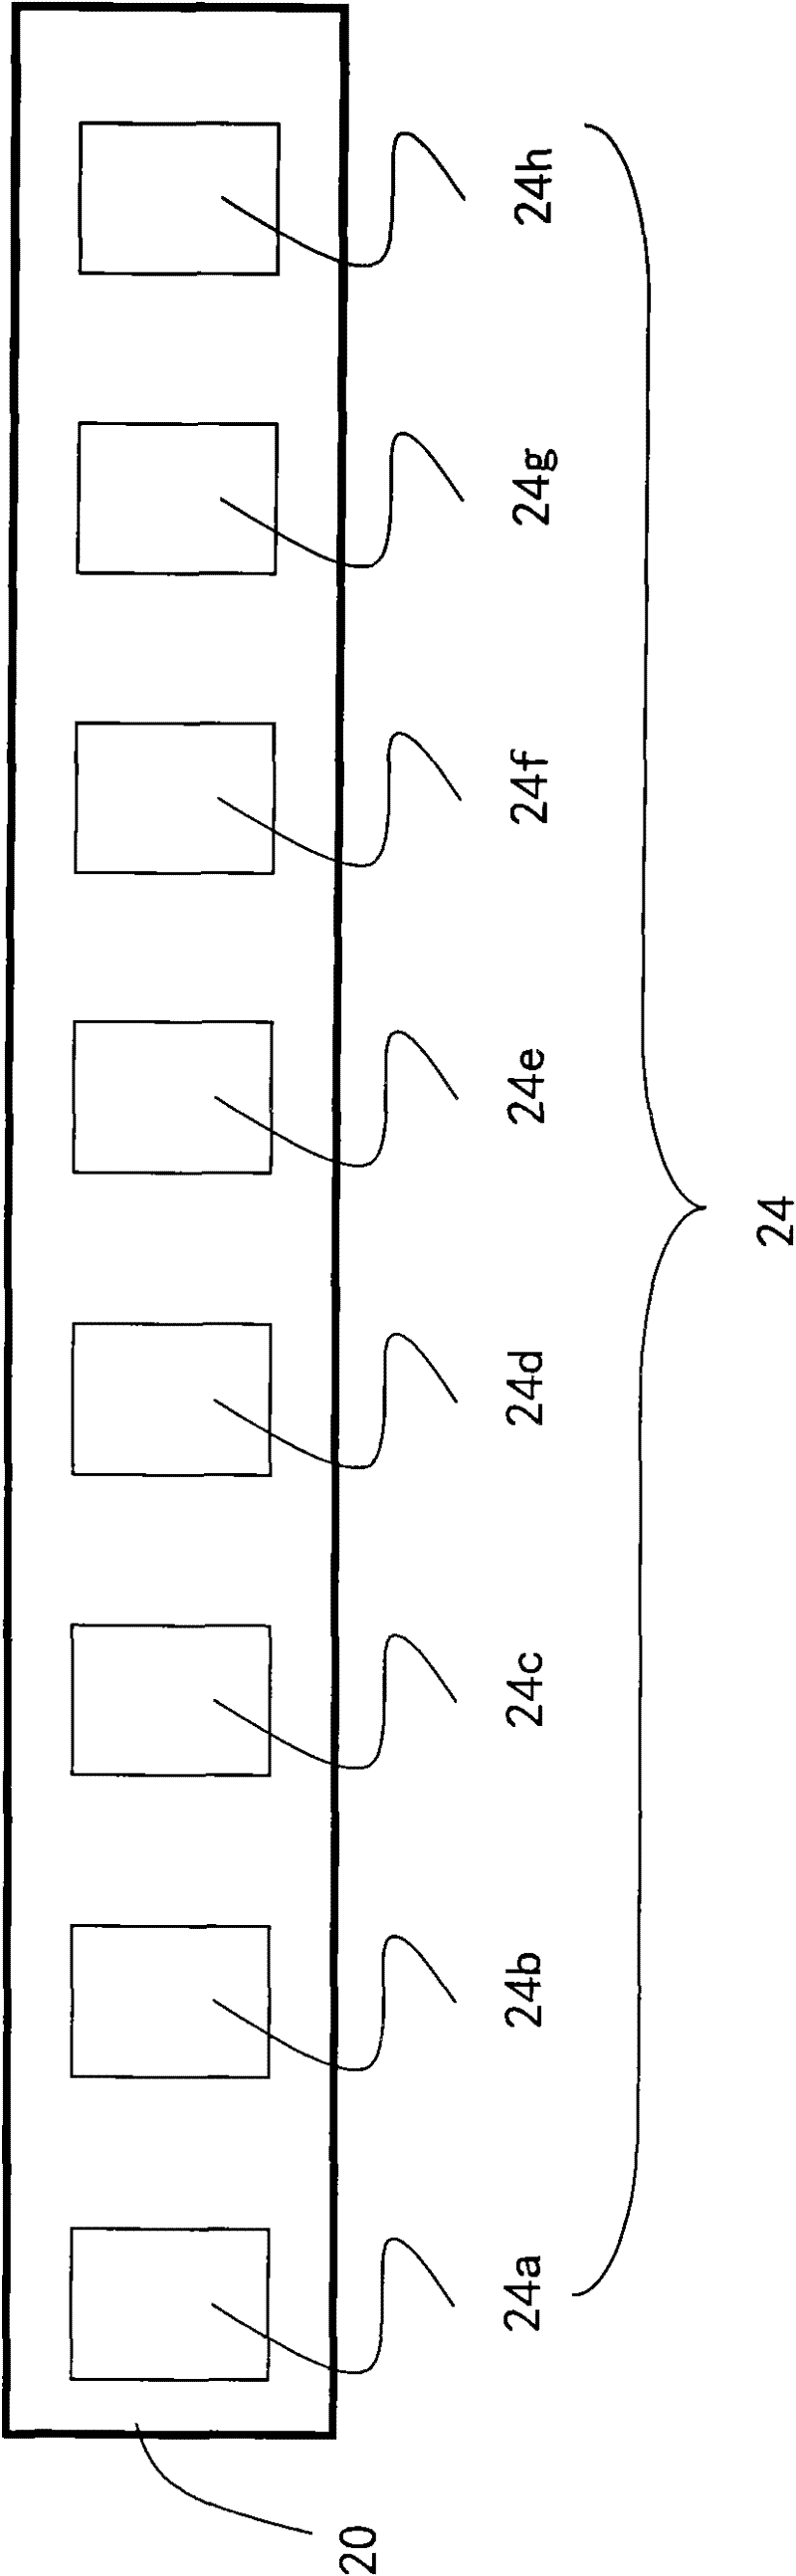 Overclocking test method for multiple core processors